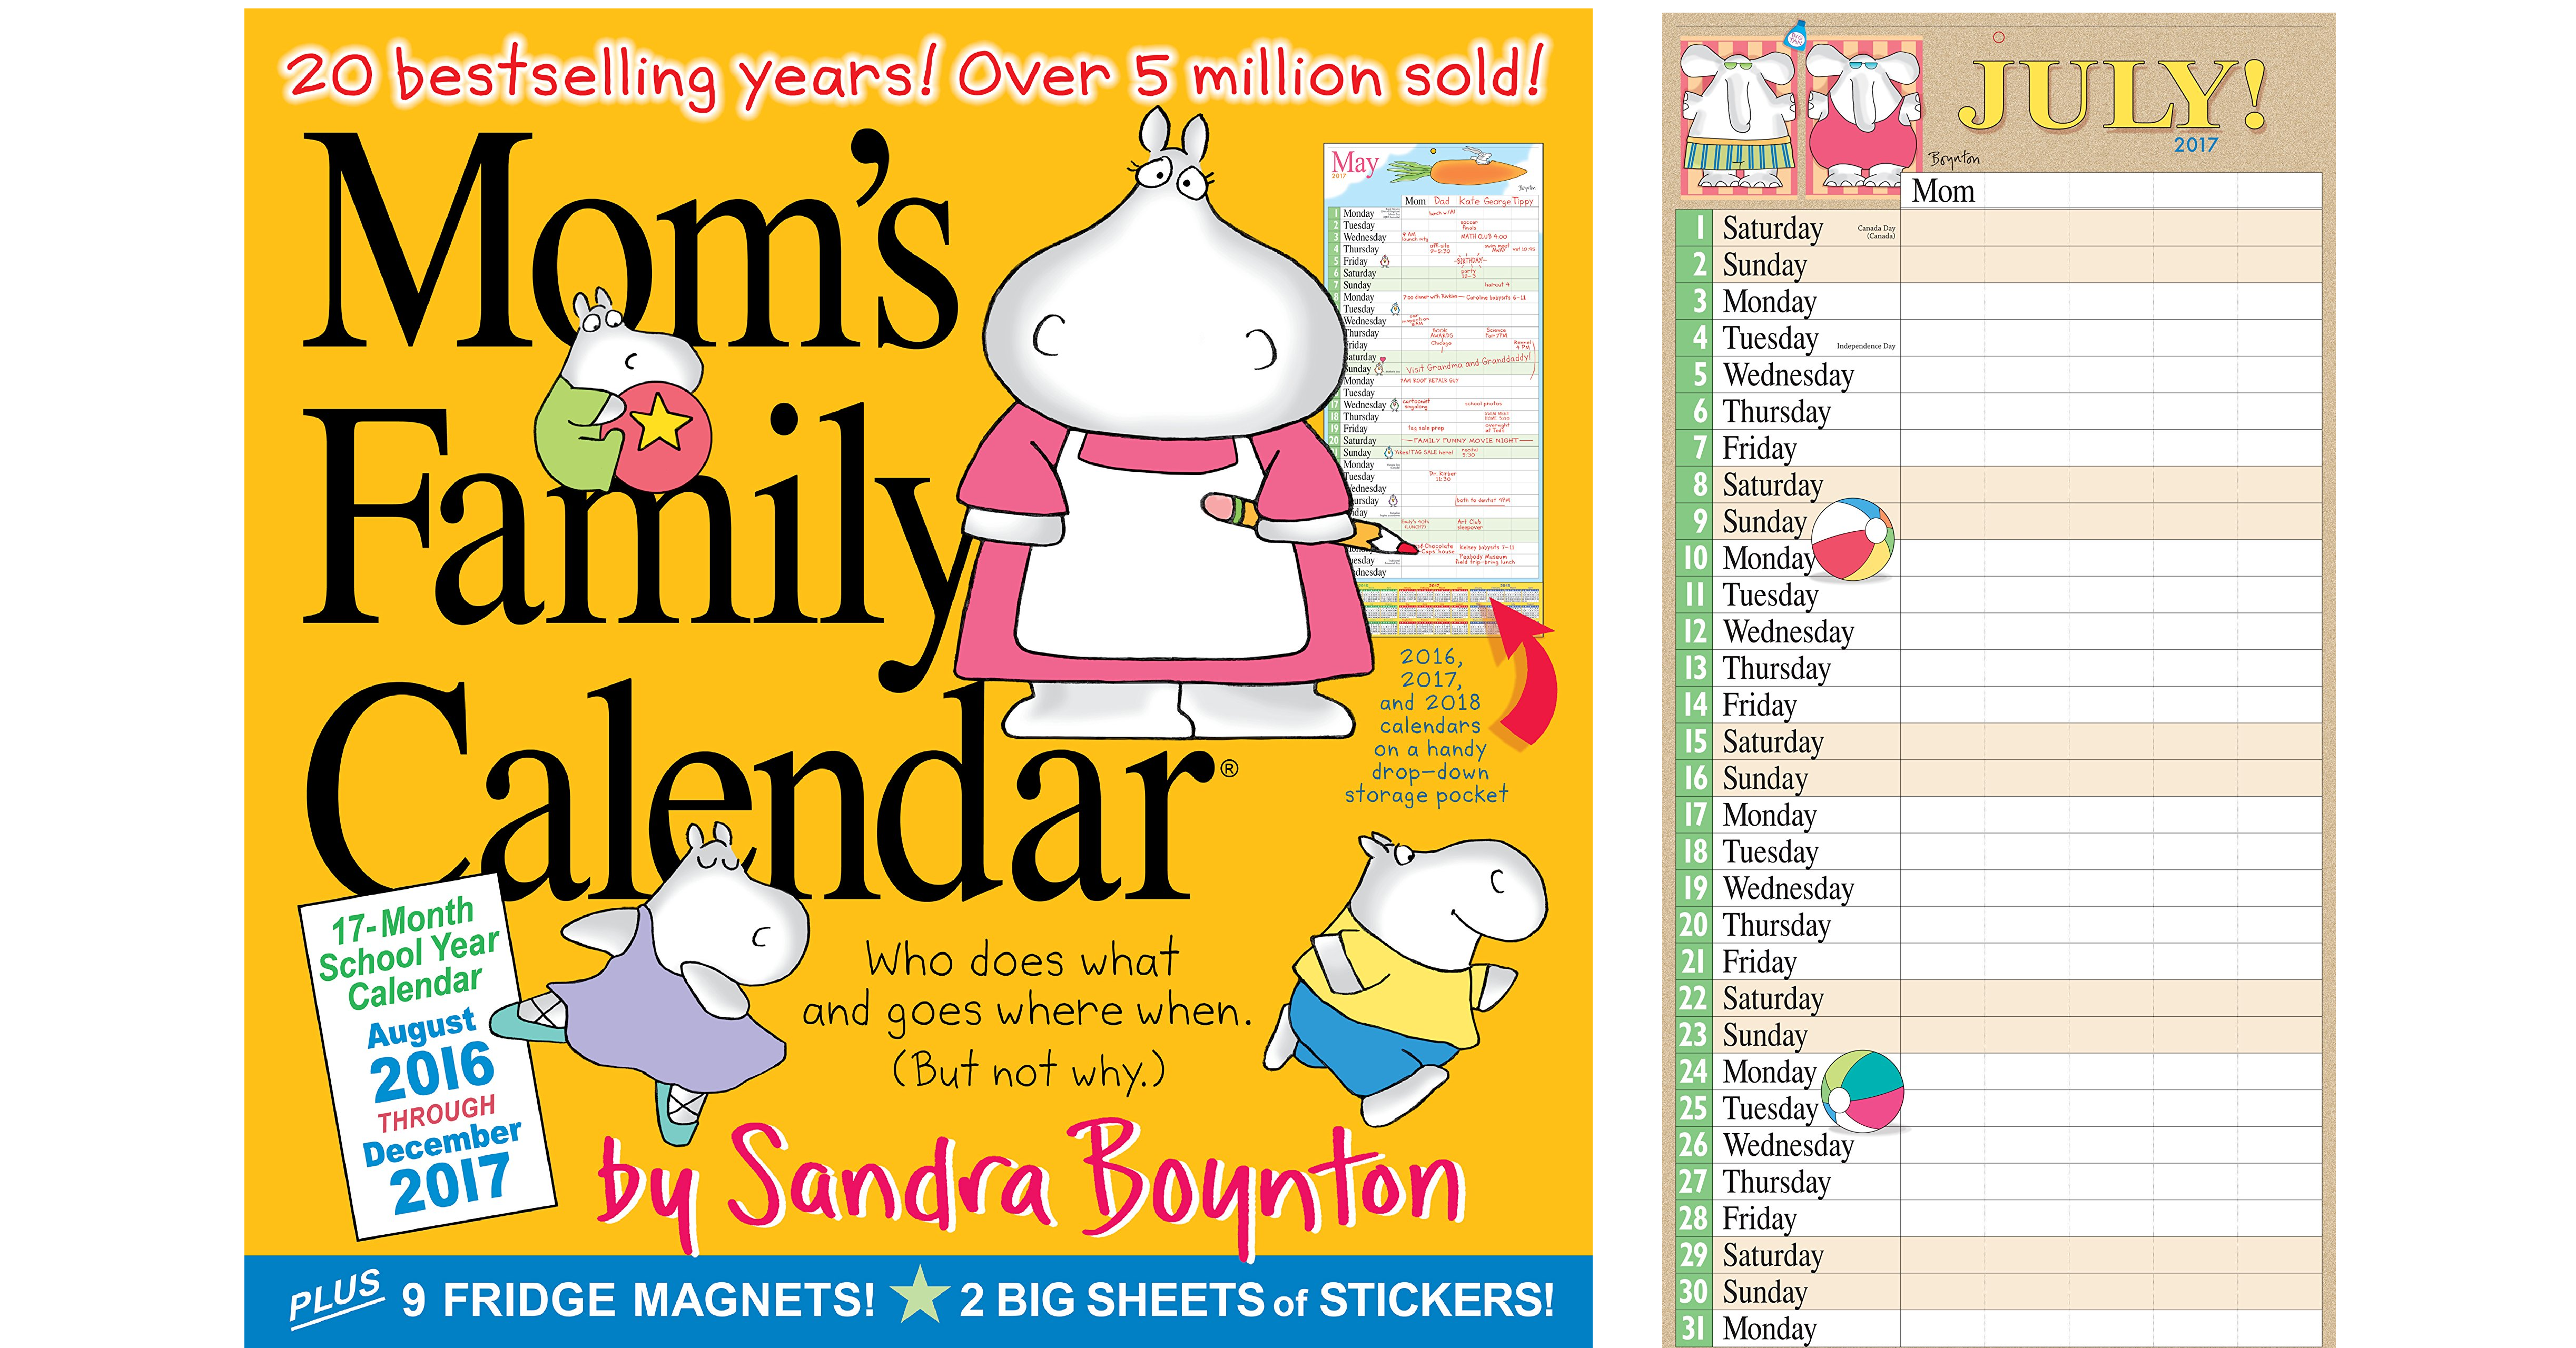 Mom’s Family Wall Calendar 2017 Only $11.01 on Amazon!